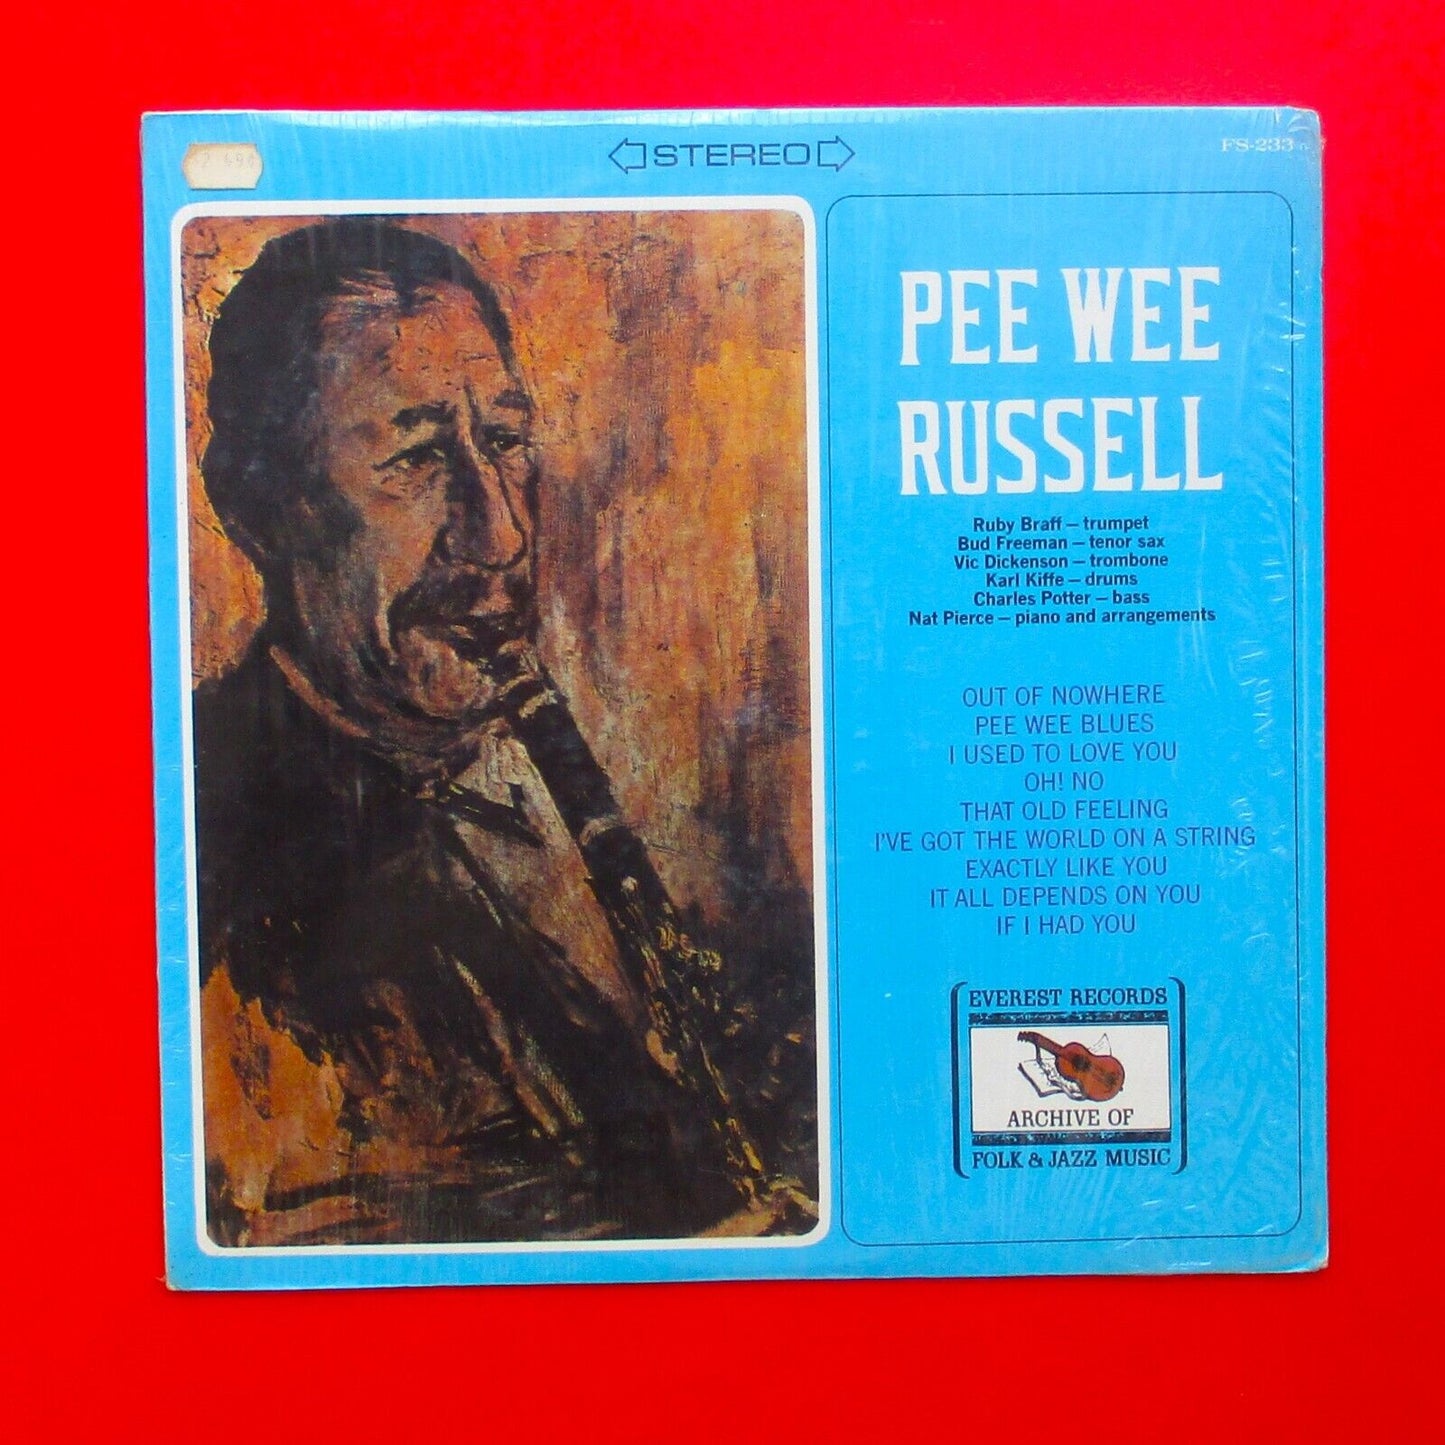 Pee Wee Russell Everest Records Archive Of Folk & Jazz Music Vinyl LP in Shrink